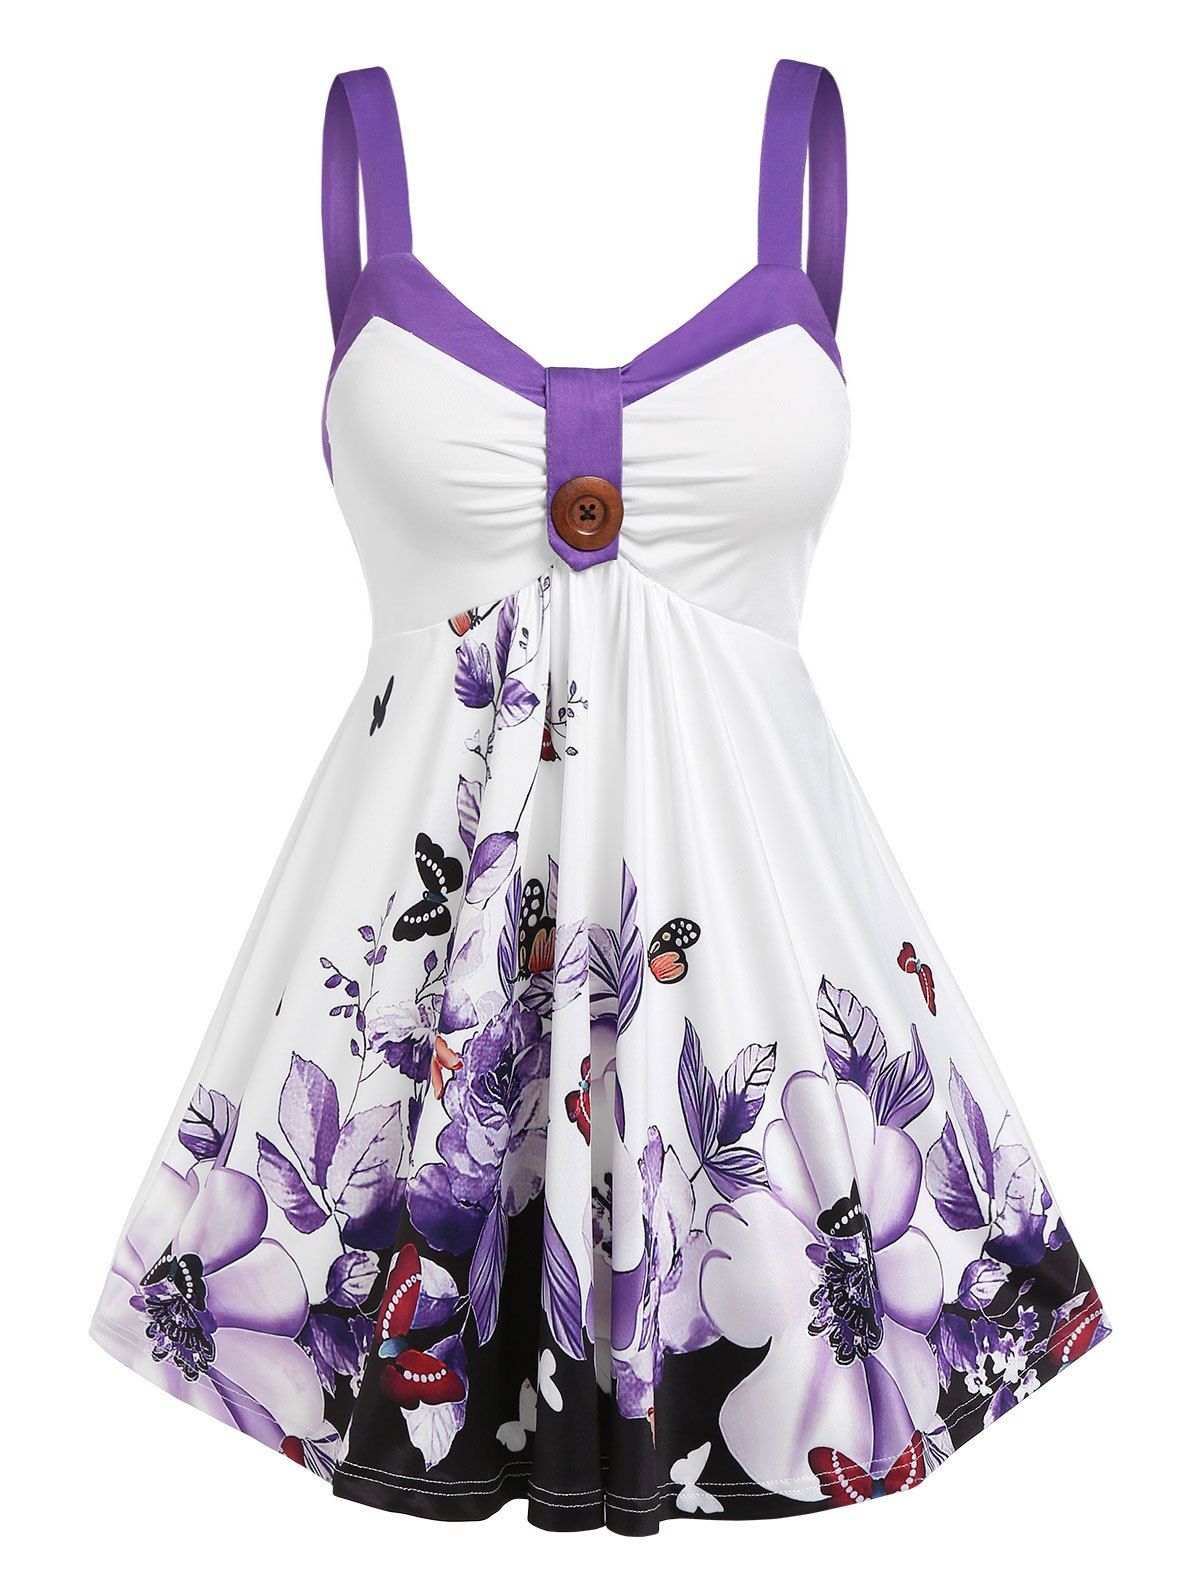 Retro Butterfly Floral Print Empire Waist Skirted Cami Tank Top - PURPLE L